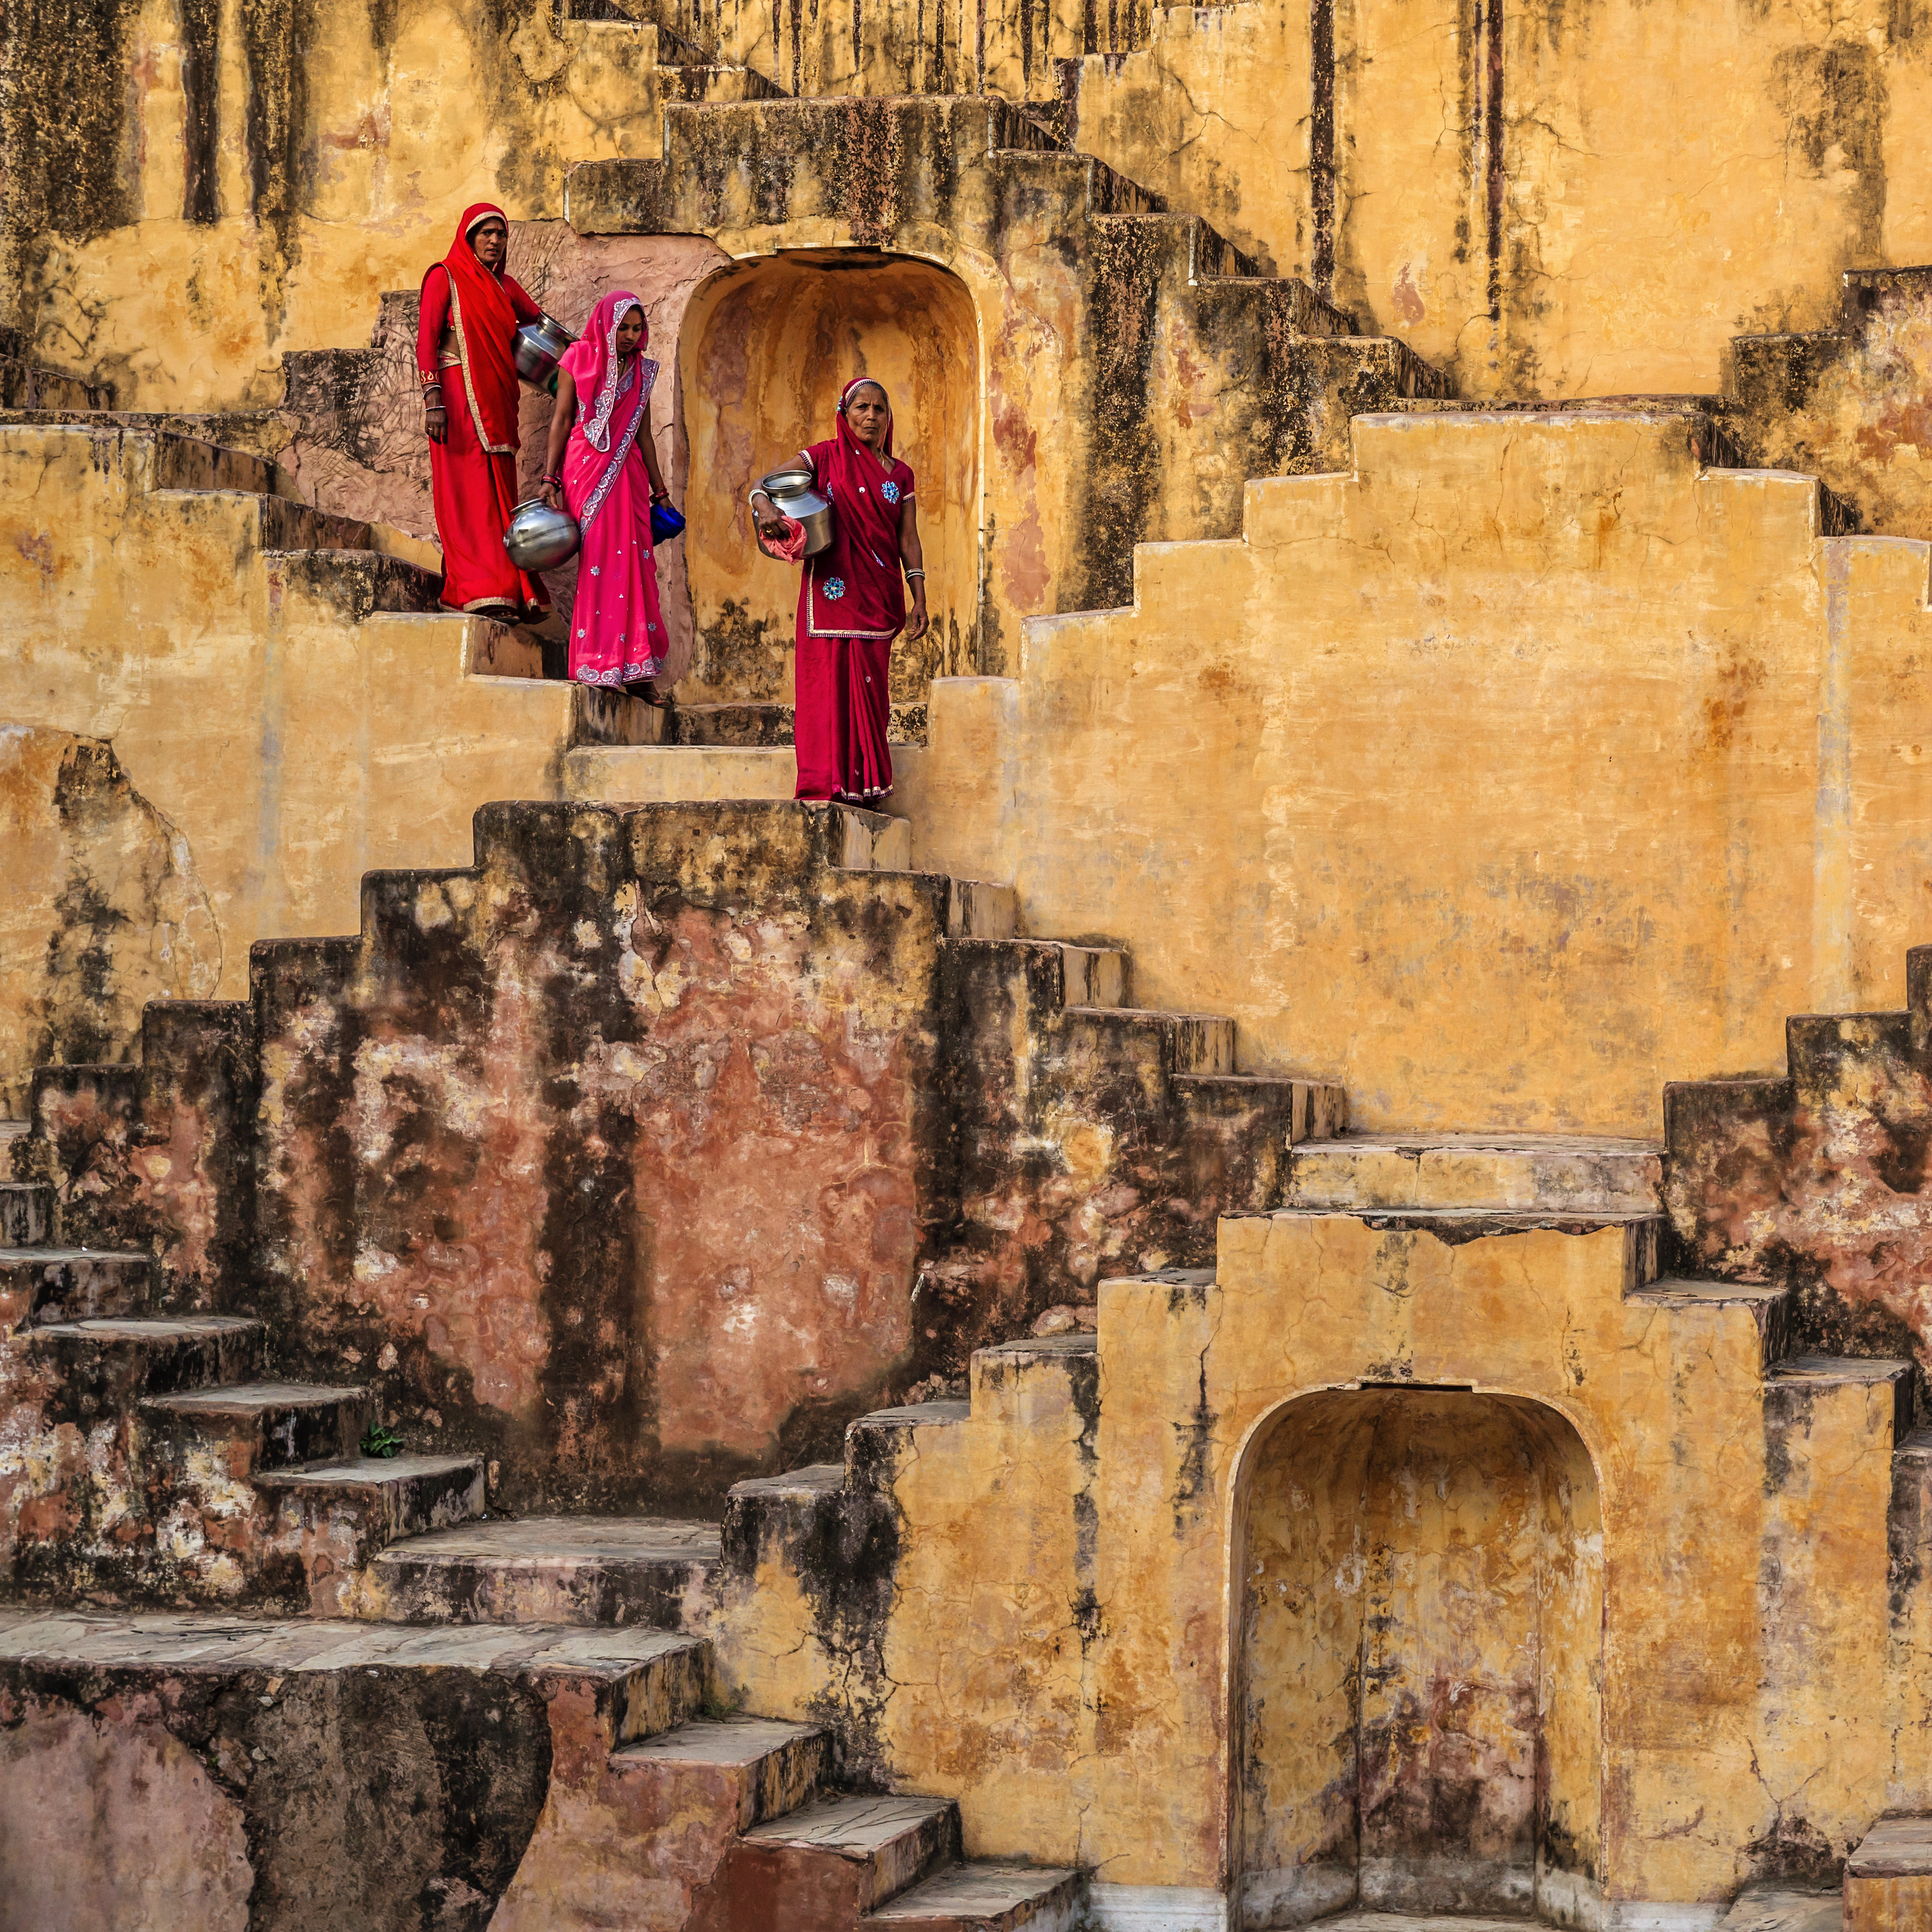 Indian women carrying water from stepwell near Jaipur, Rajasthan, India. Women and children often walk long distances to bring back jugs of water that they carry on their head.